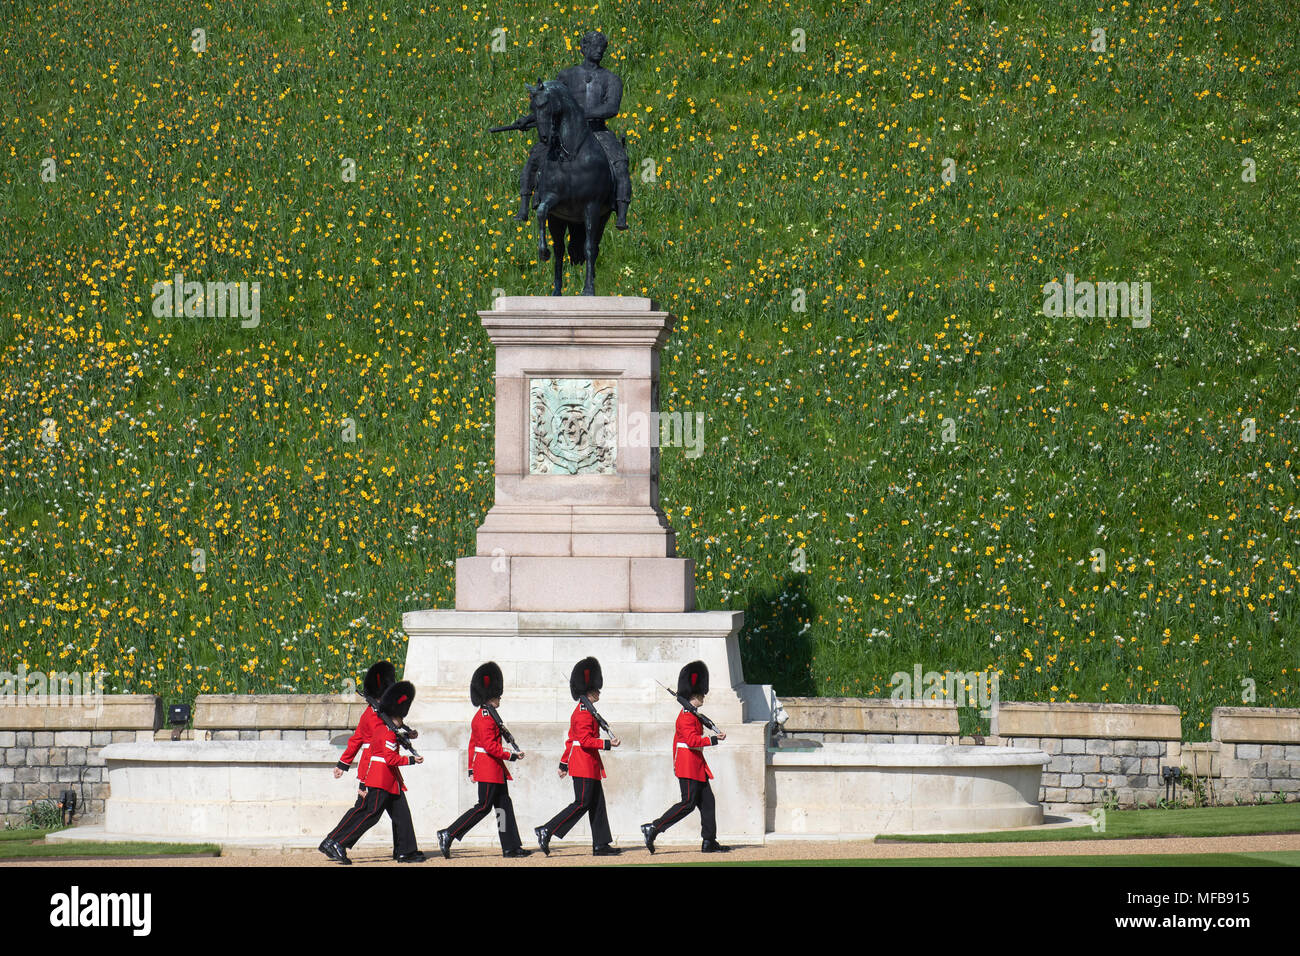 Guardsmen inside Windsor Castle march past the equestrian statue of King Charles II at the foot of the Round Tower's motte. Stock Photo